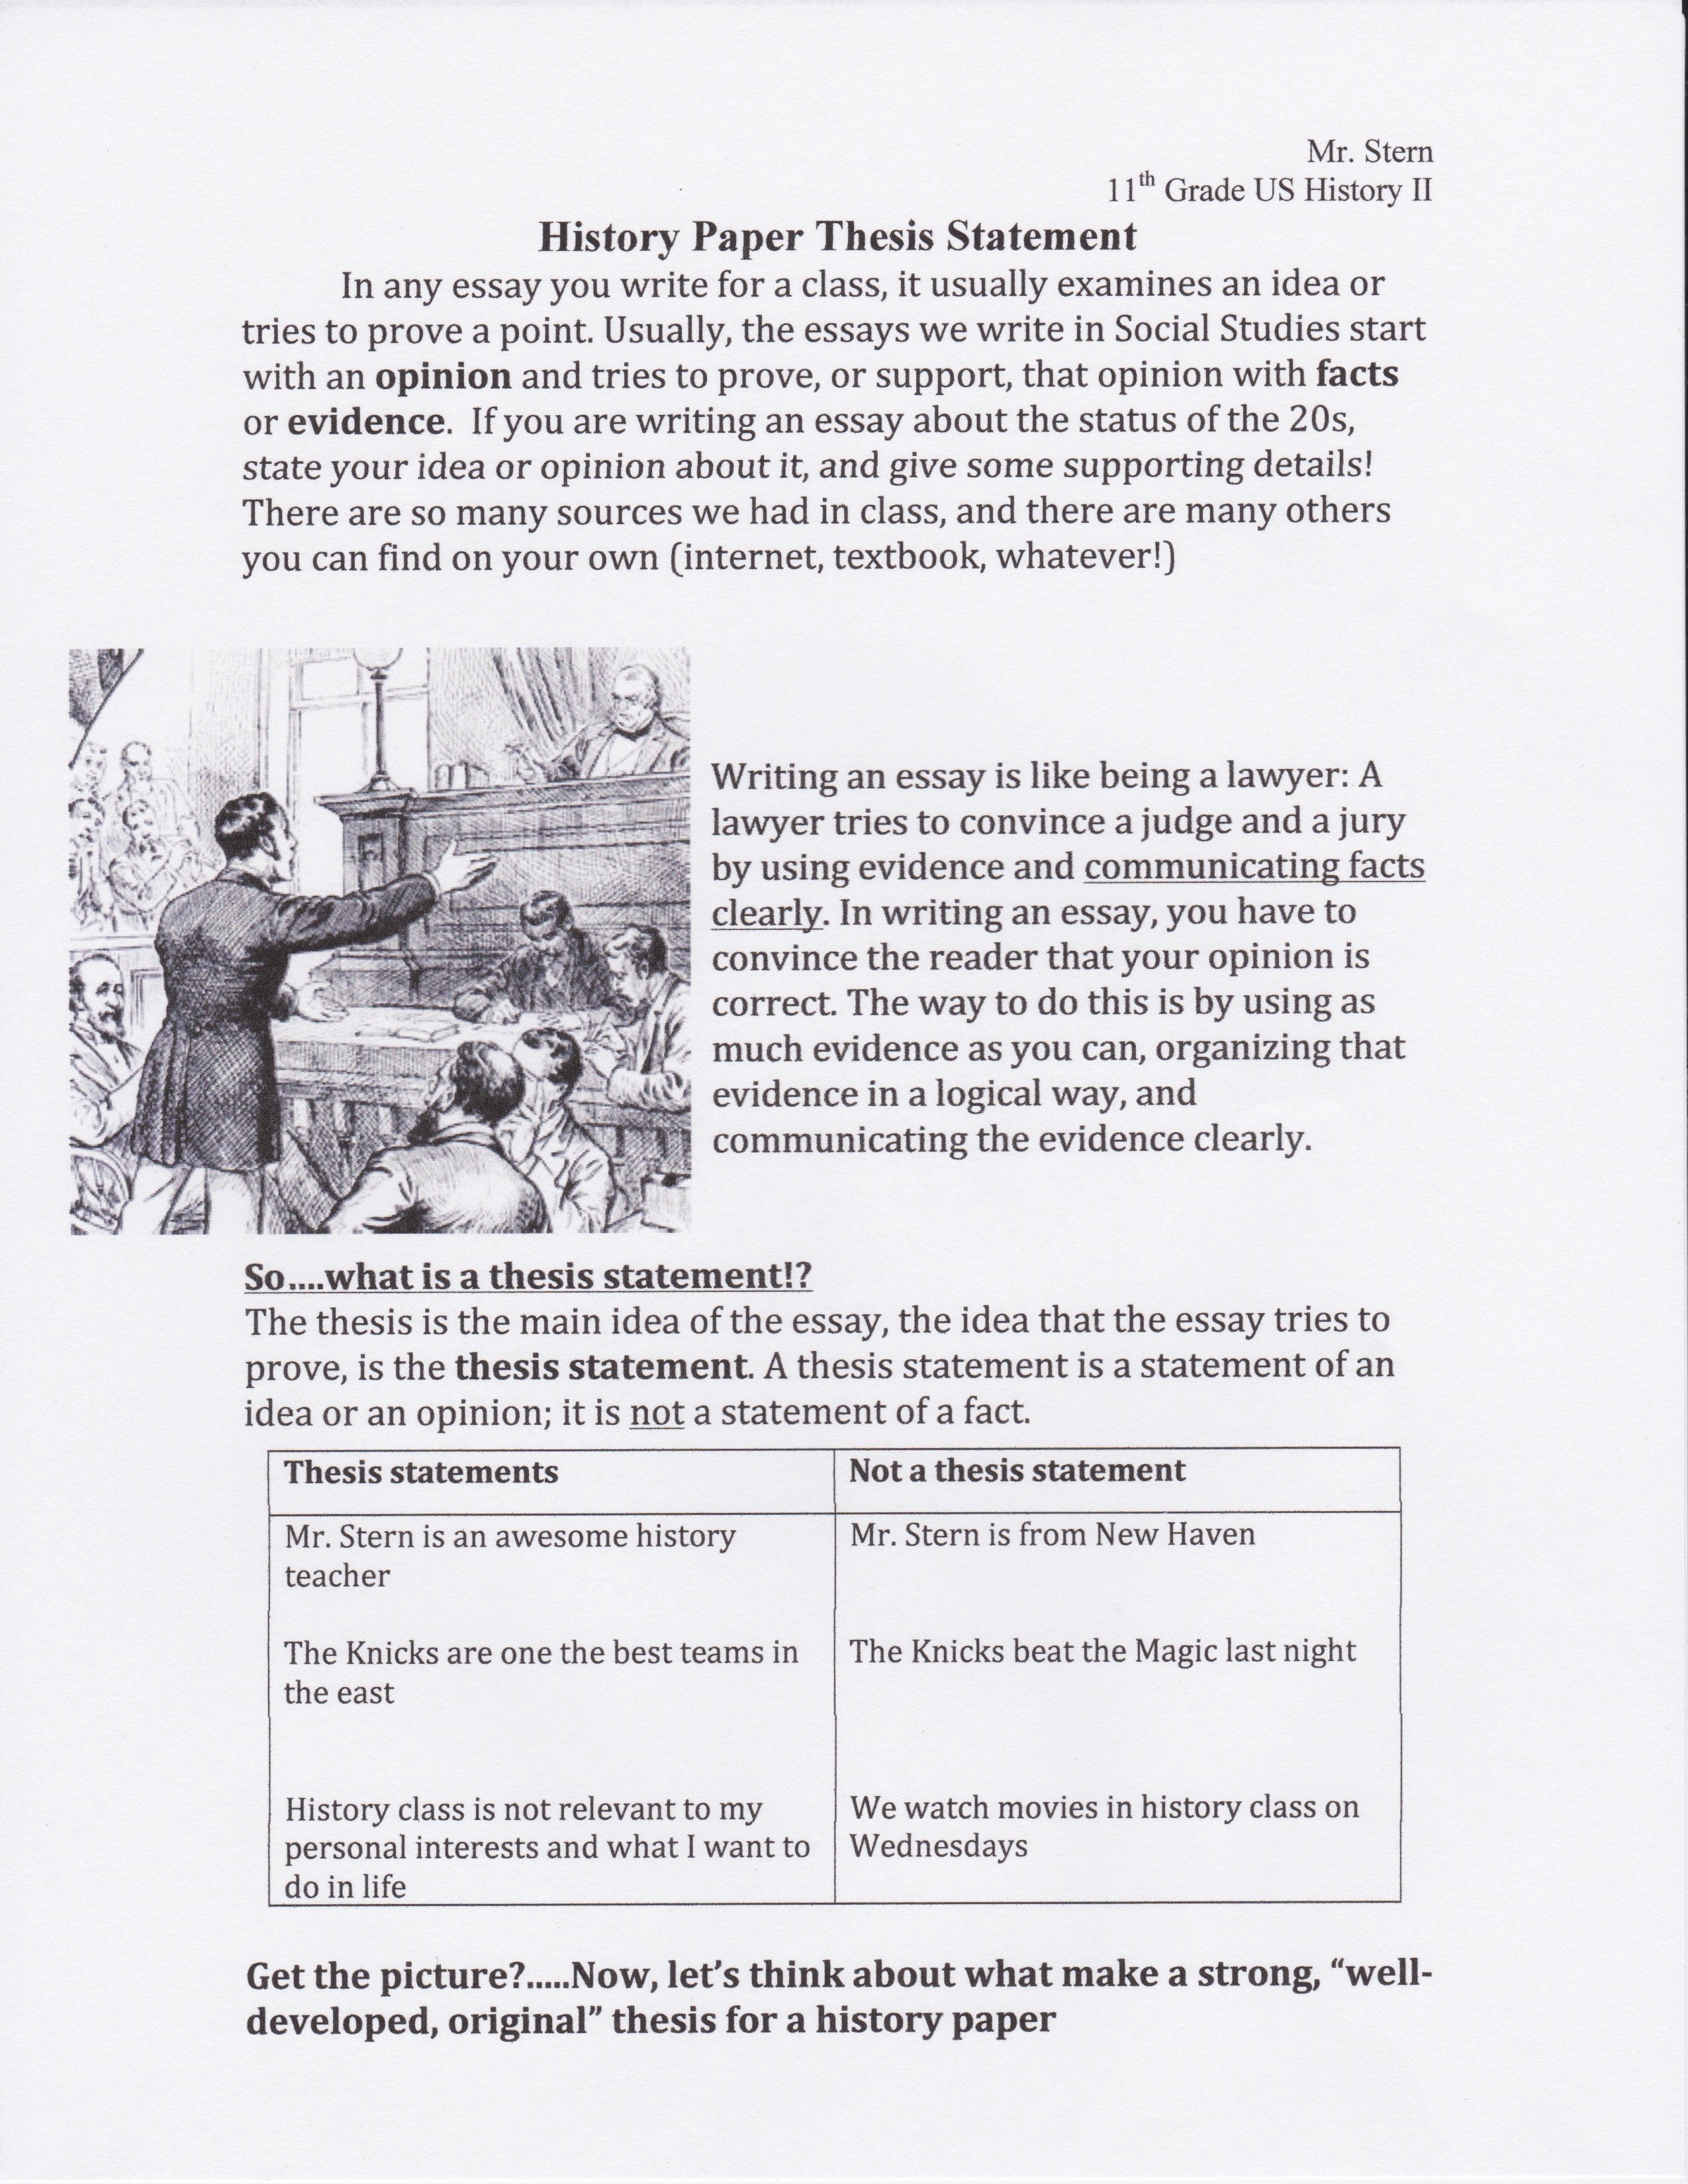 Thesis Statement Practice Worksheet Best Of Scaffolding A “strong” thesis Statement and Grammar for